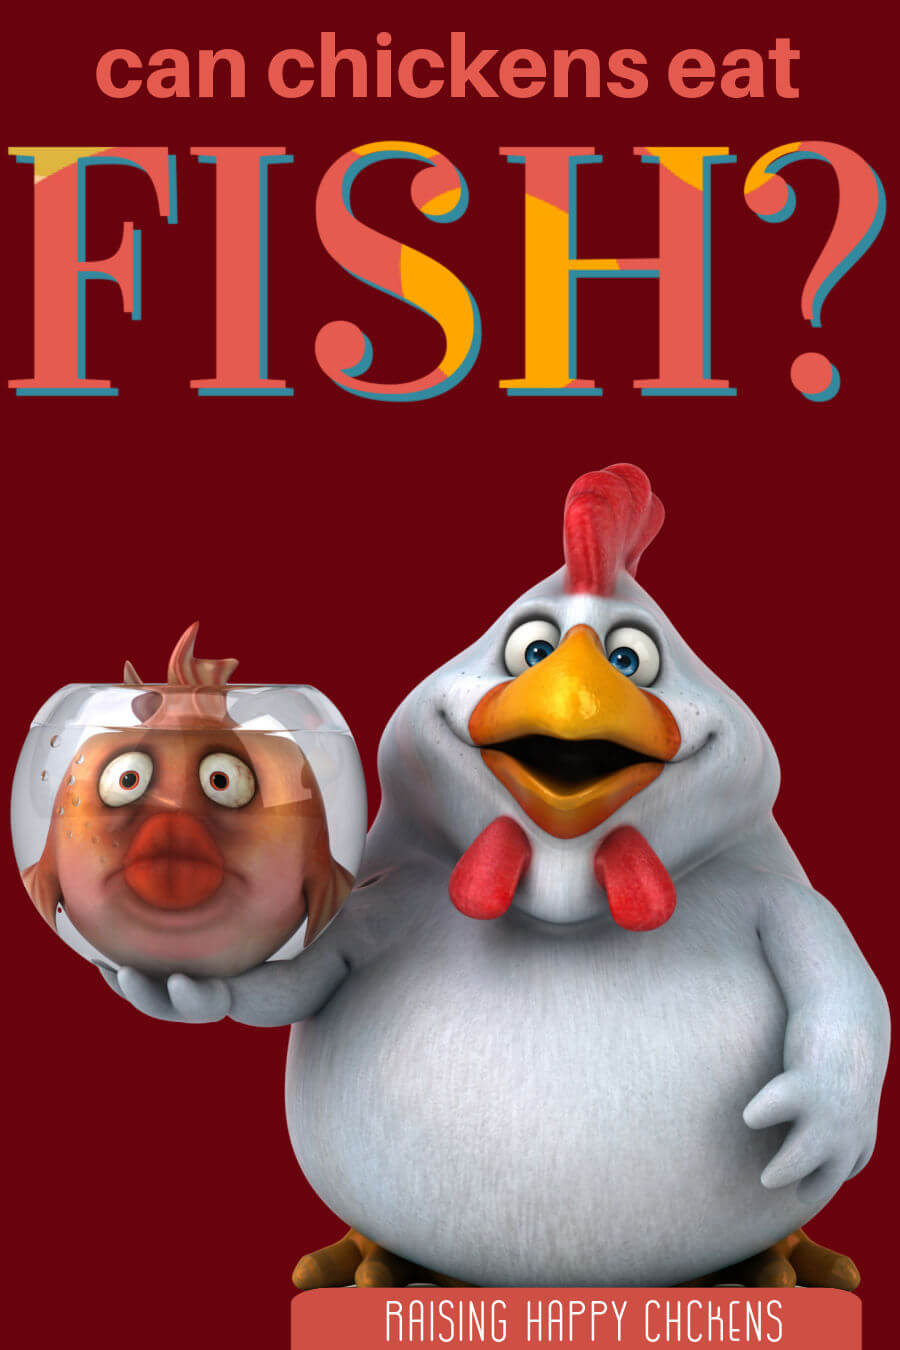 Can chickens eat fish?